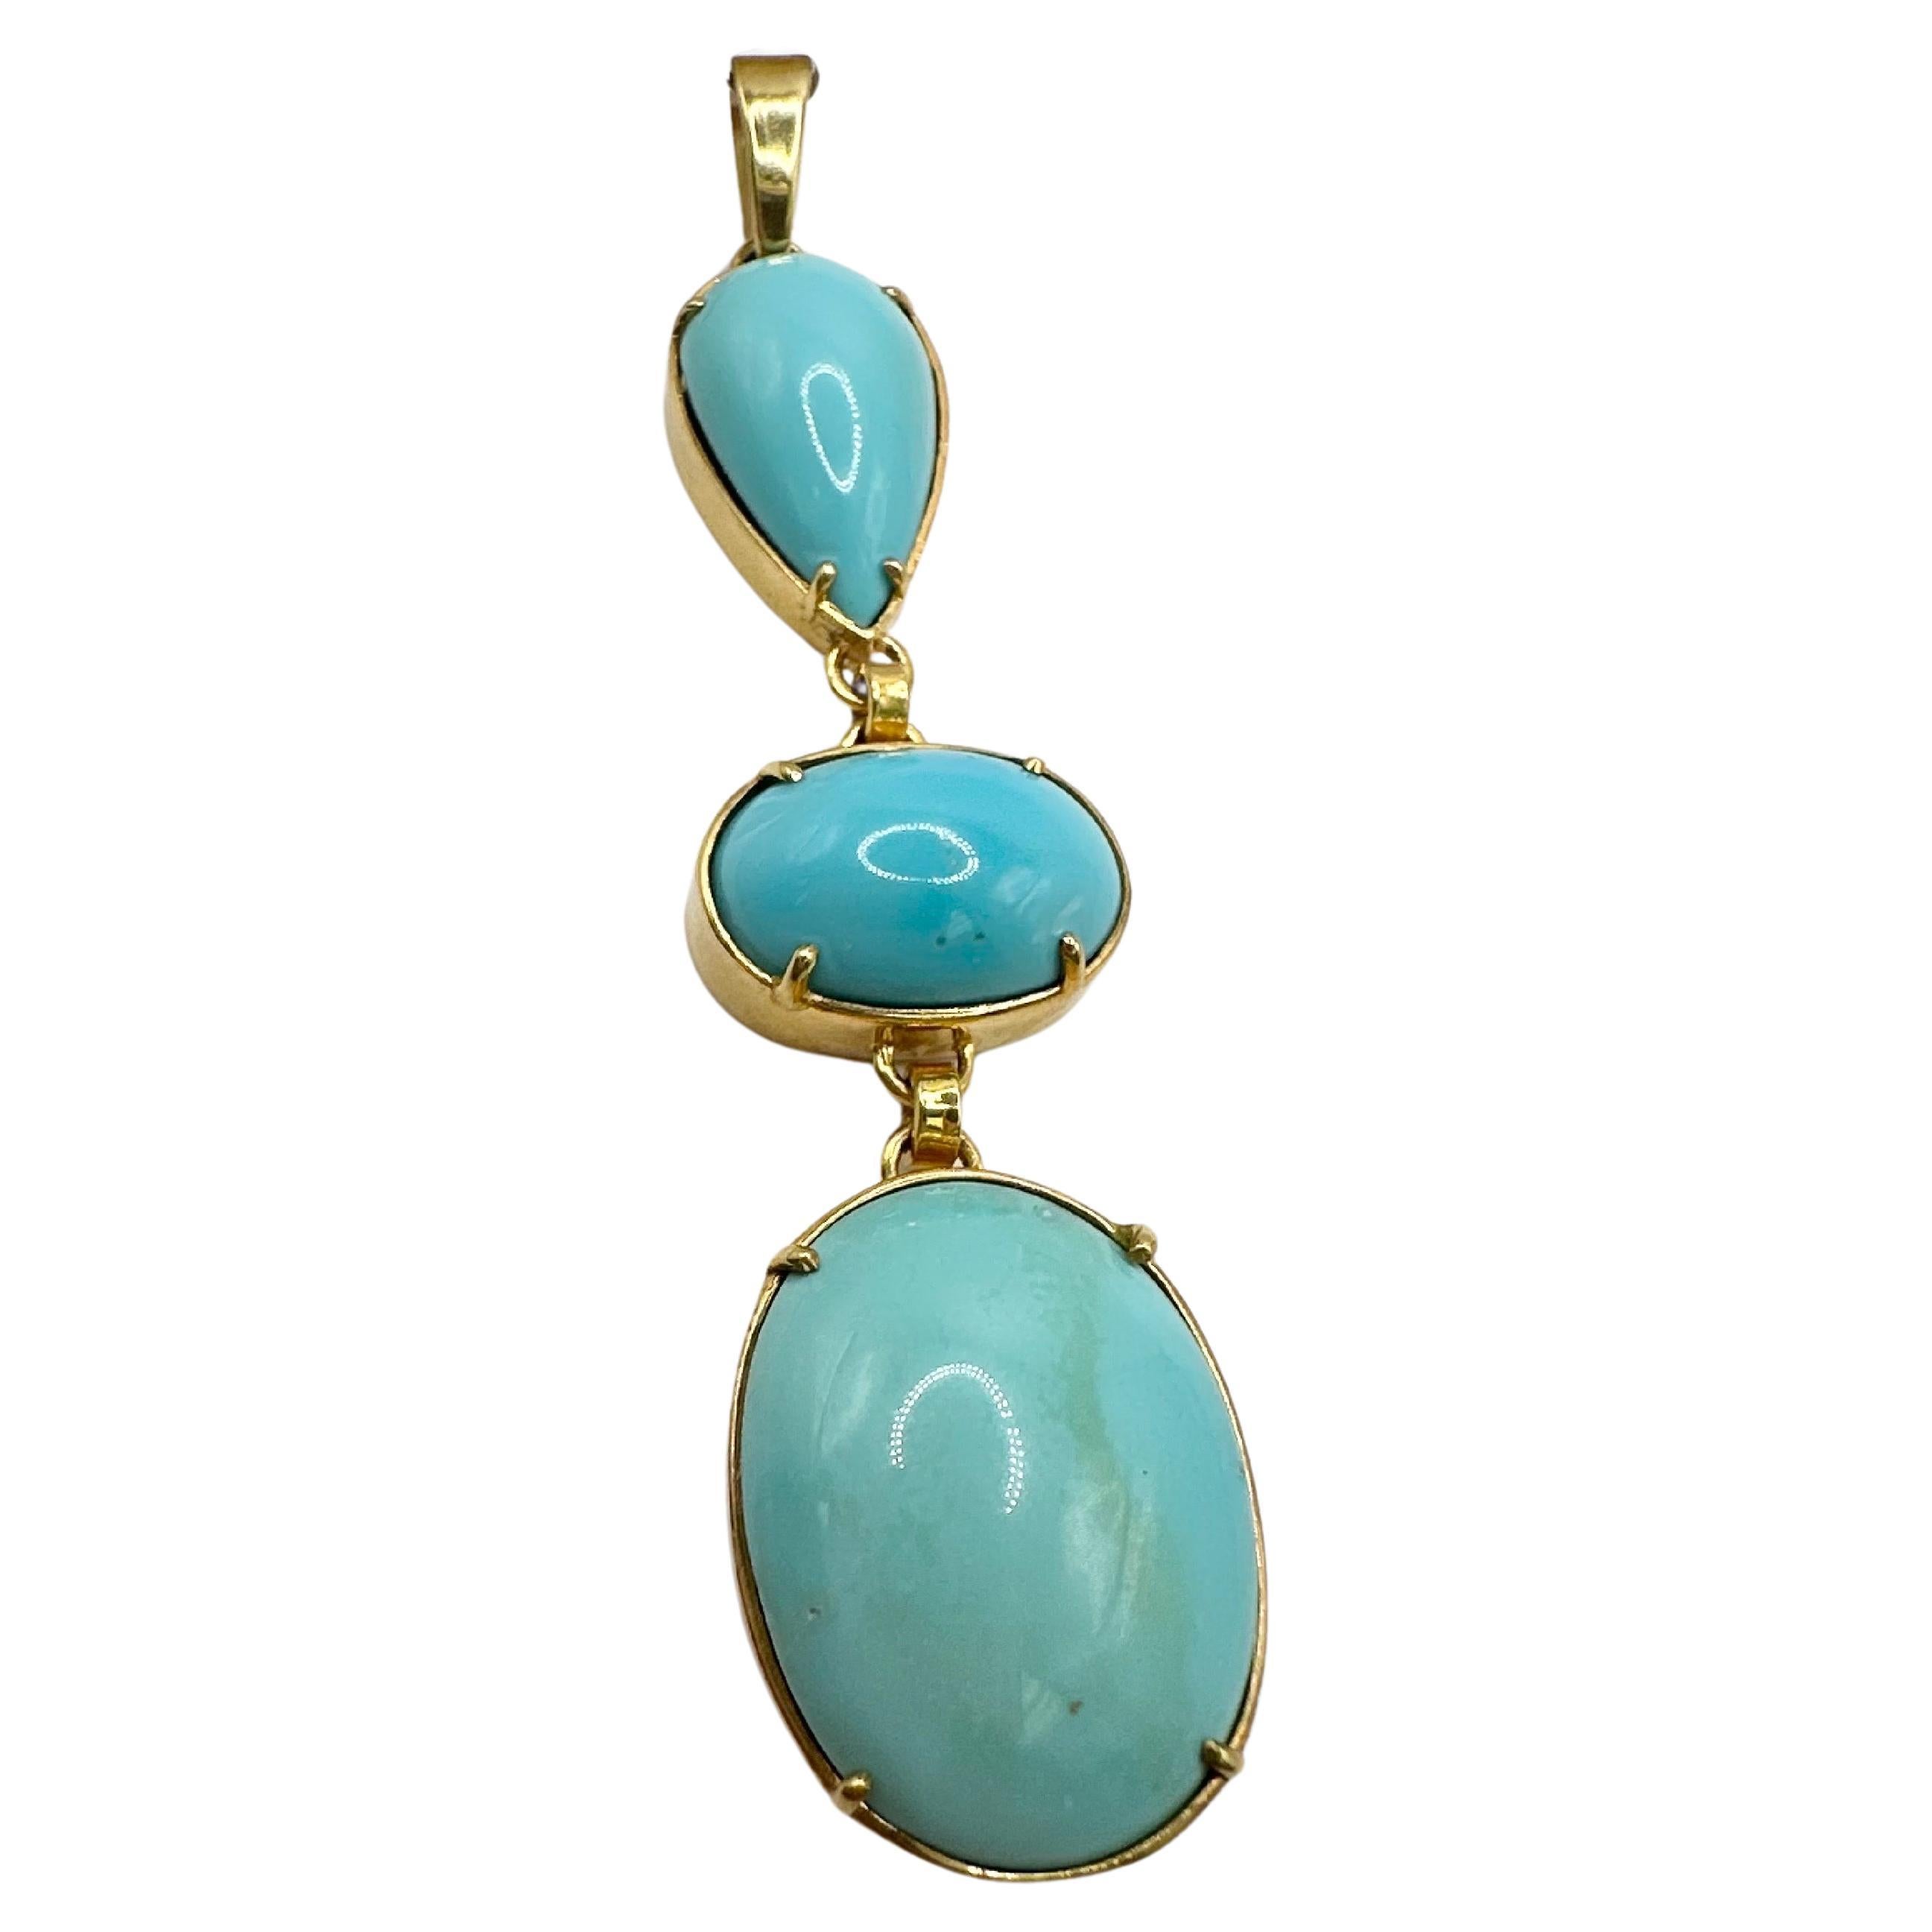 Collier pendentif persan turquoise long en or massif 18 carats